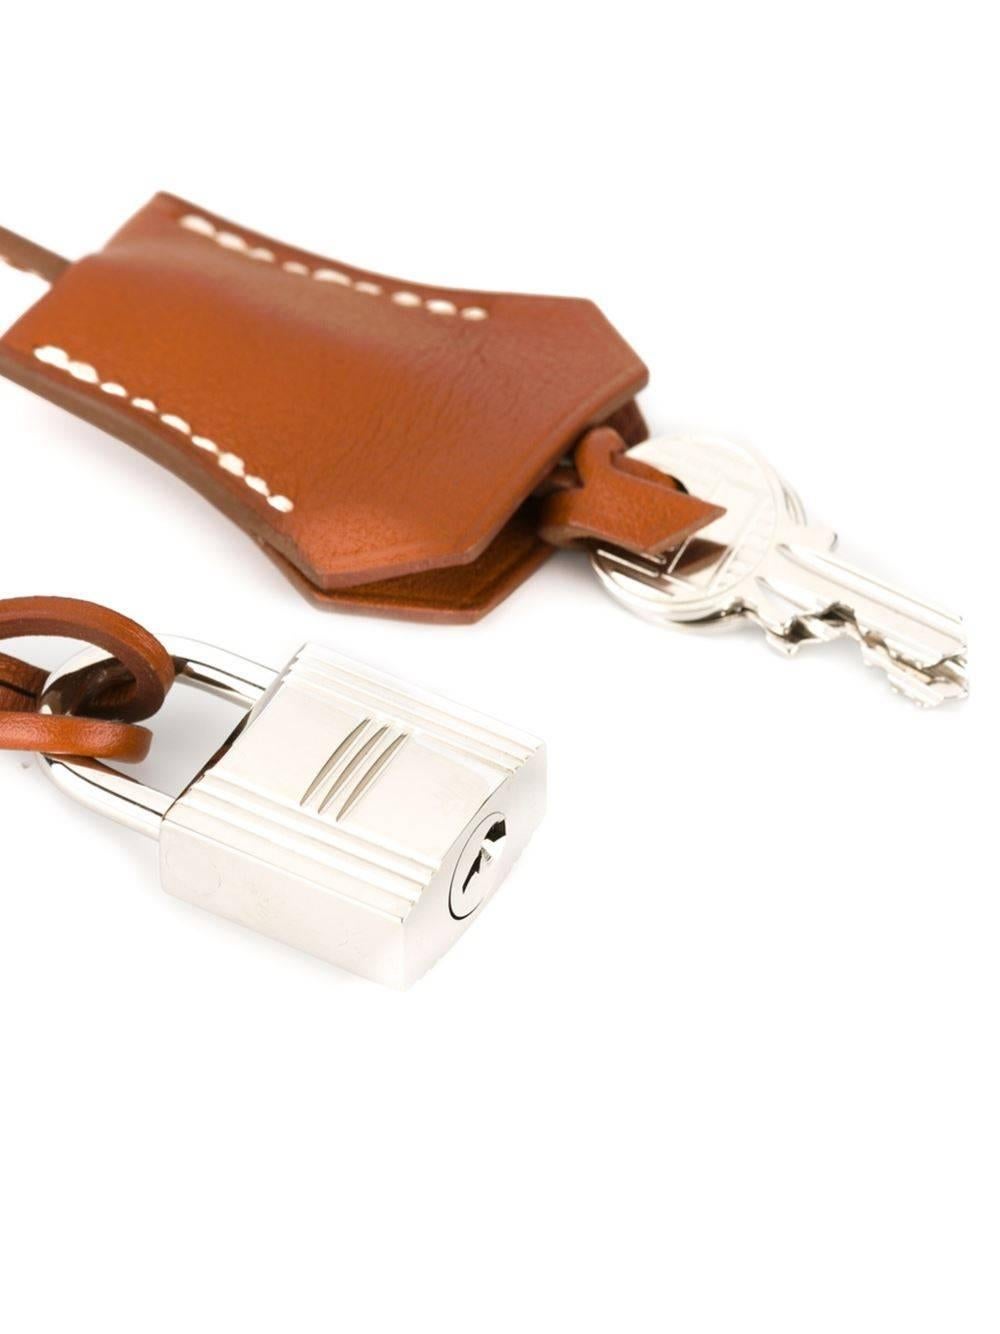 Hermès Vintage brown calf leather tag padlock featuring a silver-tone padlock and key. 

Size : Width: 3.8 cm, Length: 26 cm

Excellent condition. 